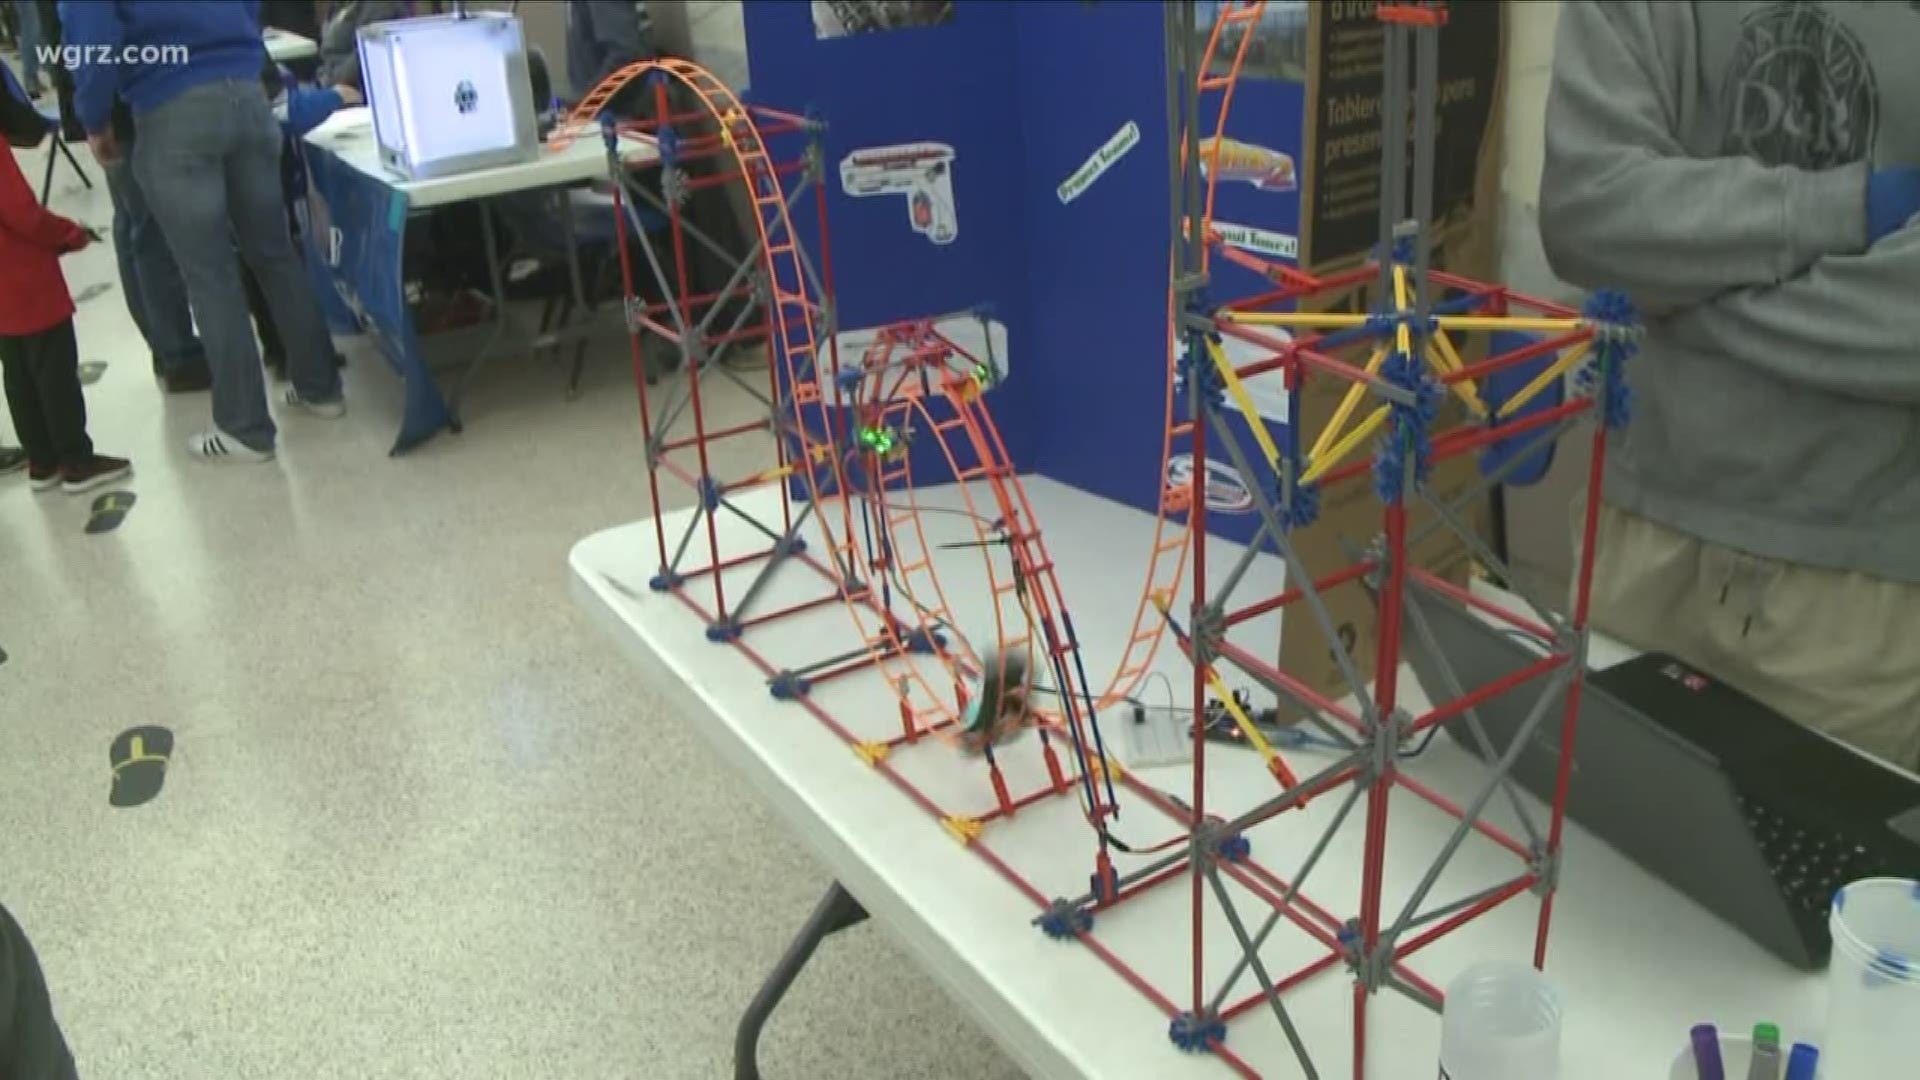 The Buffalo Museum of Science is celebrating National Engineers Week.